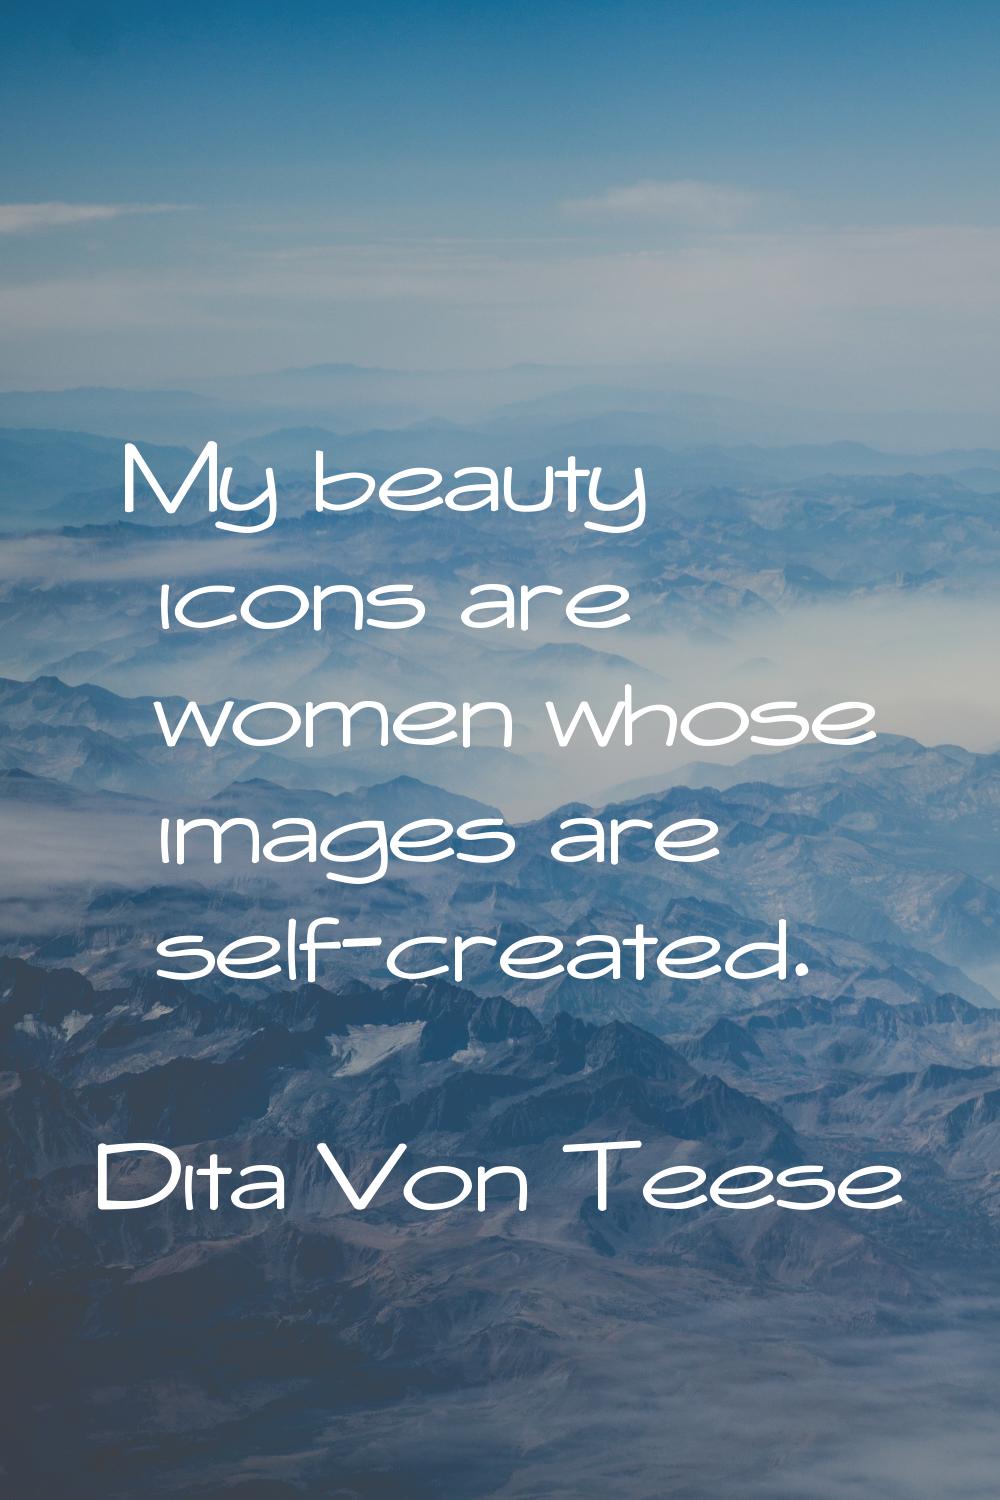 My beauty icons are women whose images are self-created.